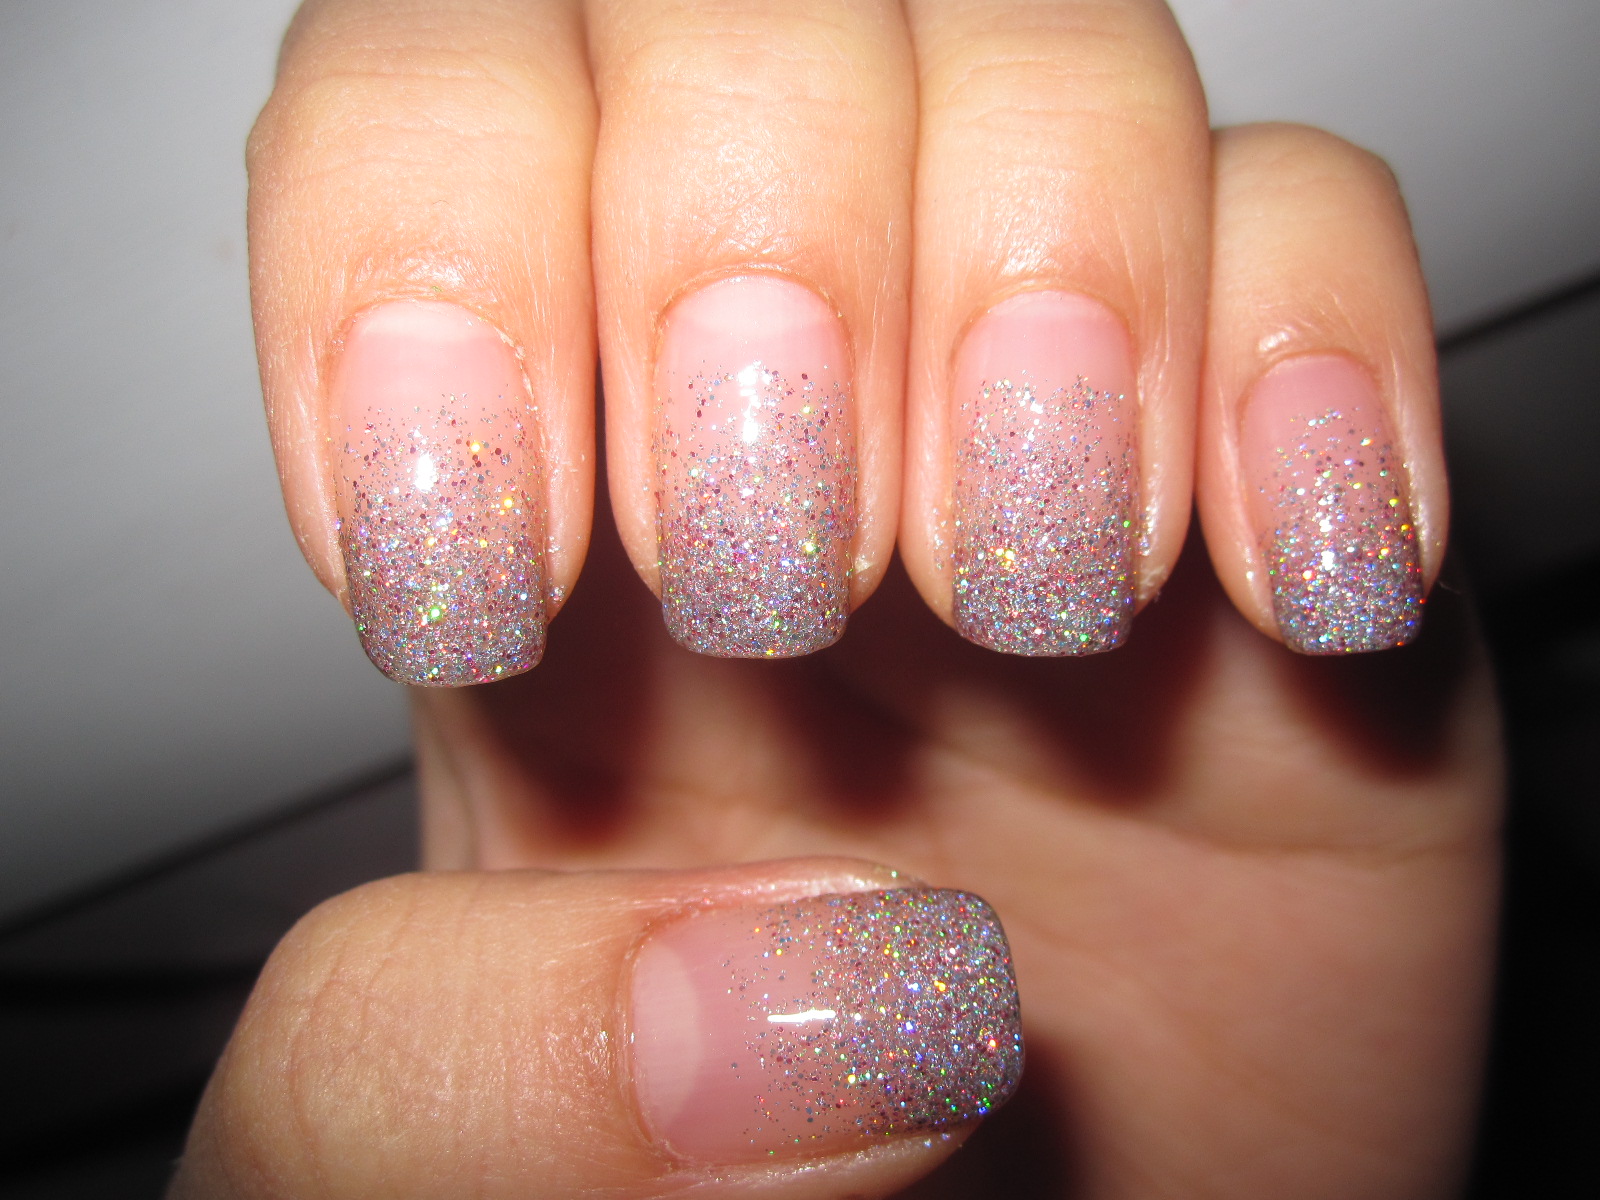 10. Glitter or sparkly top coat - wide 7